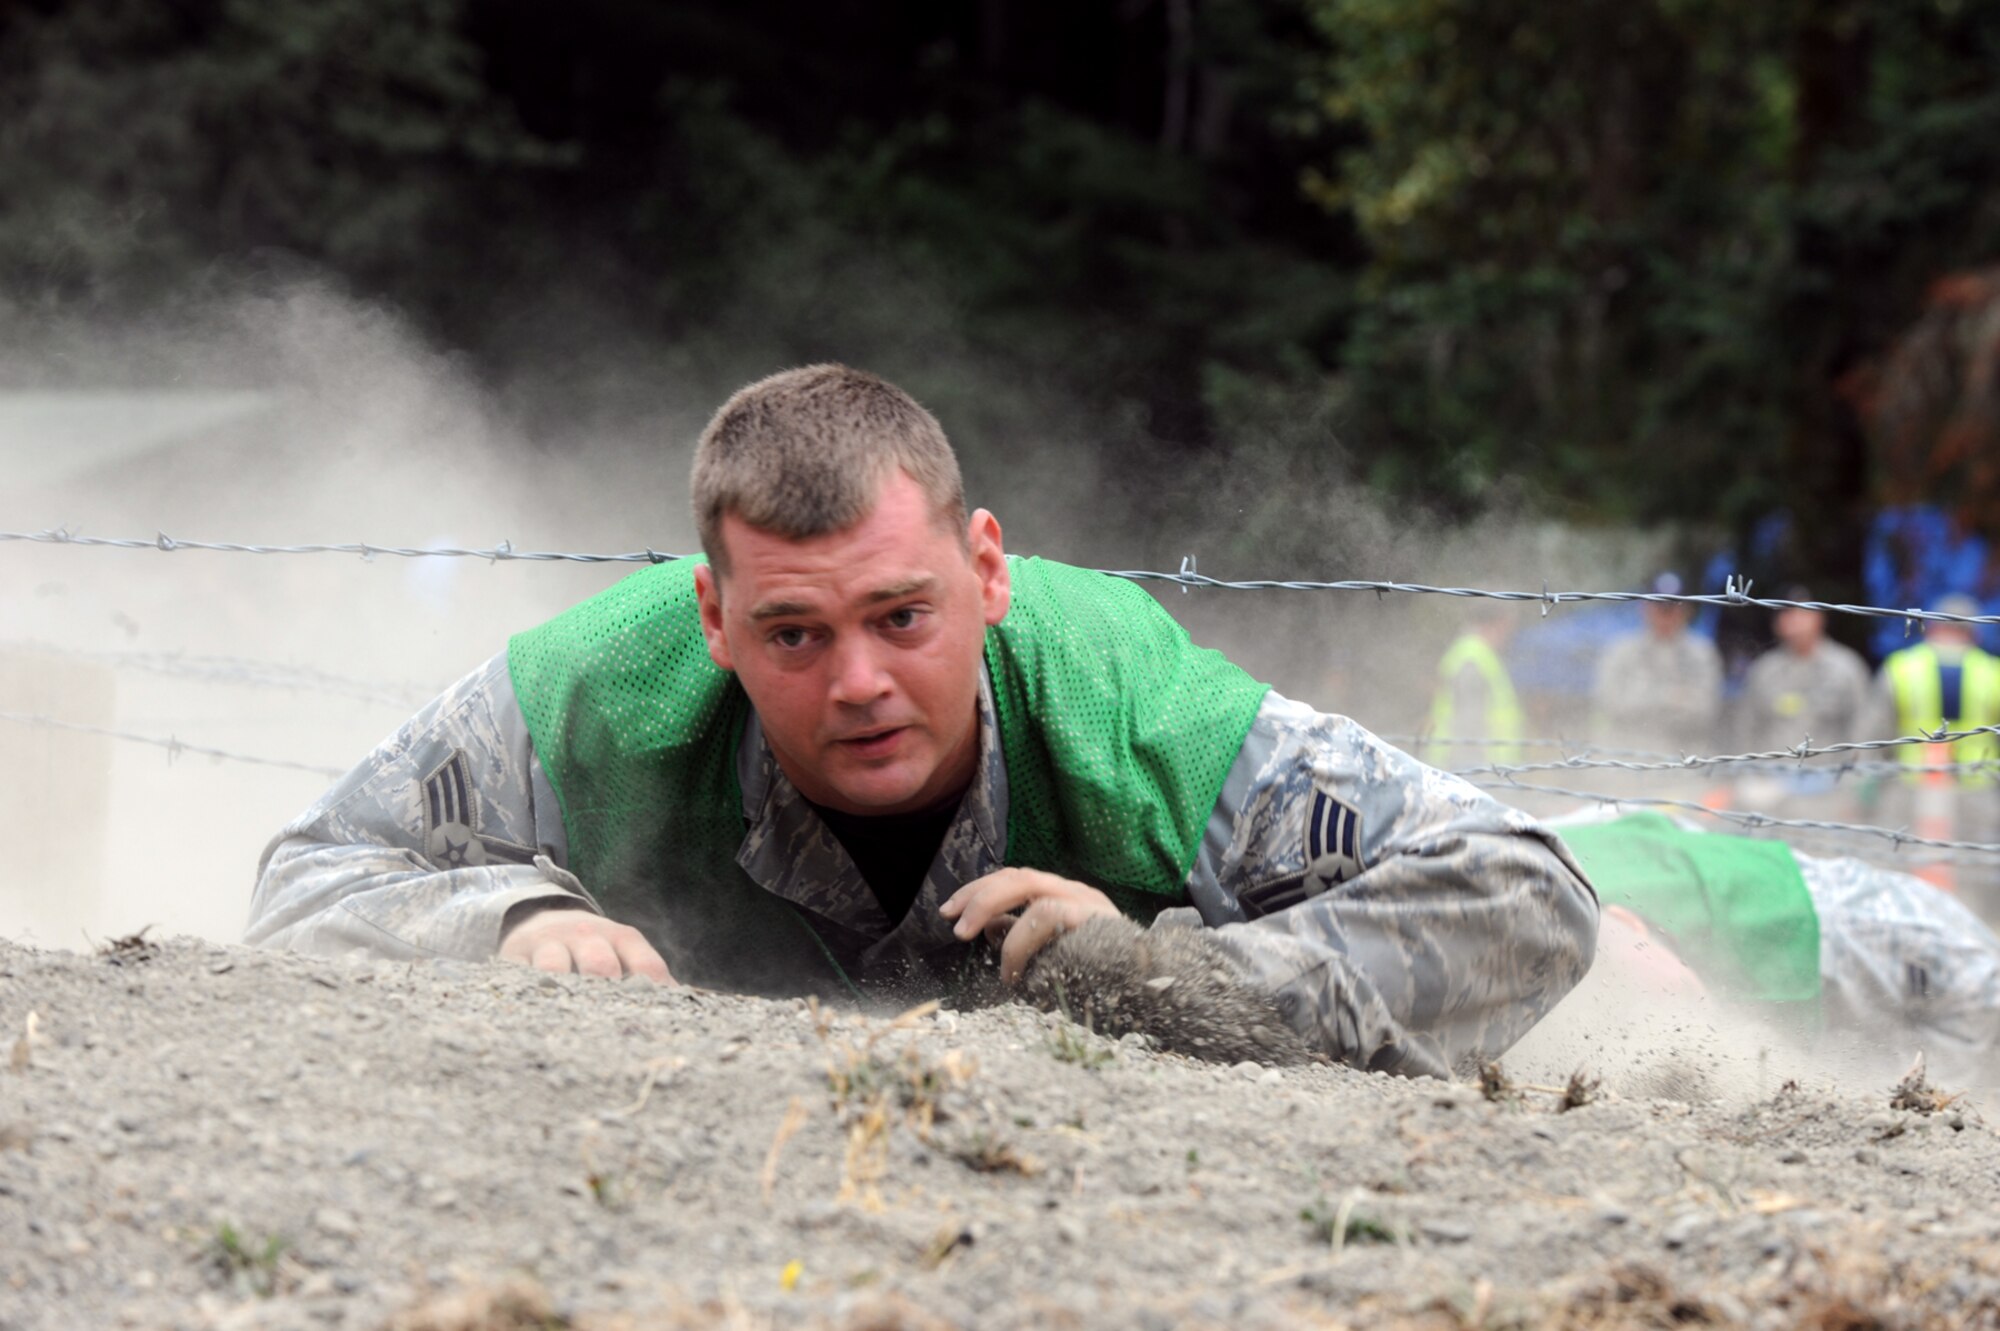 Senior Airman Nathan Shelley low crawls through an obstacle during a combat endurance competition on July 23 at RODEO 2009. Airman Shelley is a Reservist assigned to the 931st Air Refueling Group at McConnell Air Force Base, Kan. His security forces teammates at RODEO are active-duty Airmen assigned to the 22nd Air Refueling Wing, the 931st's host unit at McConnell. Eight Reservists are at McChord AFB, Wash., with 22nd ARW Airmen to represent McConnell as a total-force RODEO team for the first time. (U.S. Air Force photo/Tech. Sgt. Chyrece Campbell)  